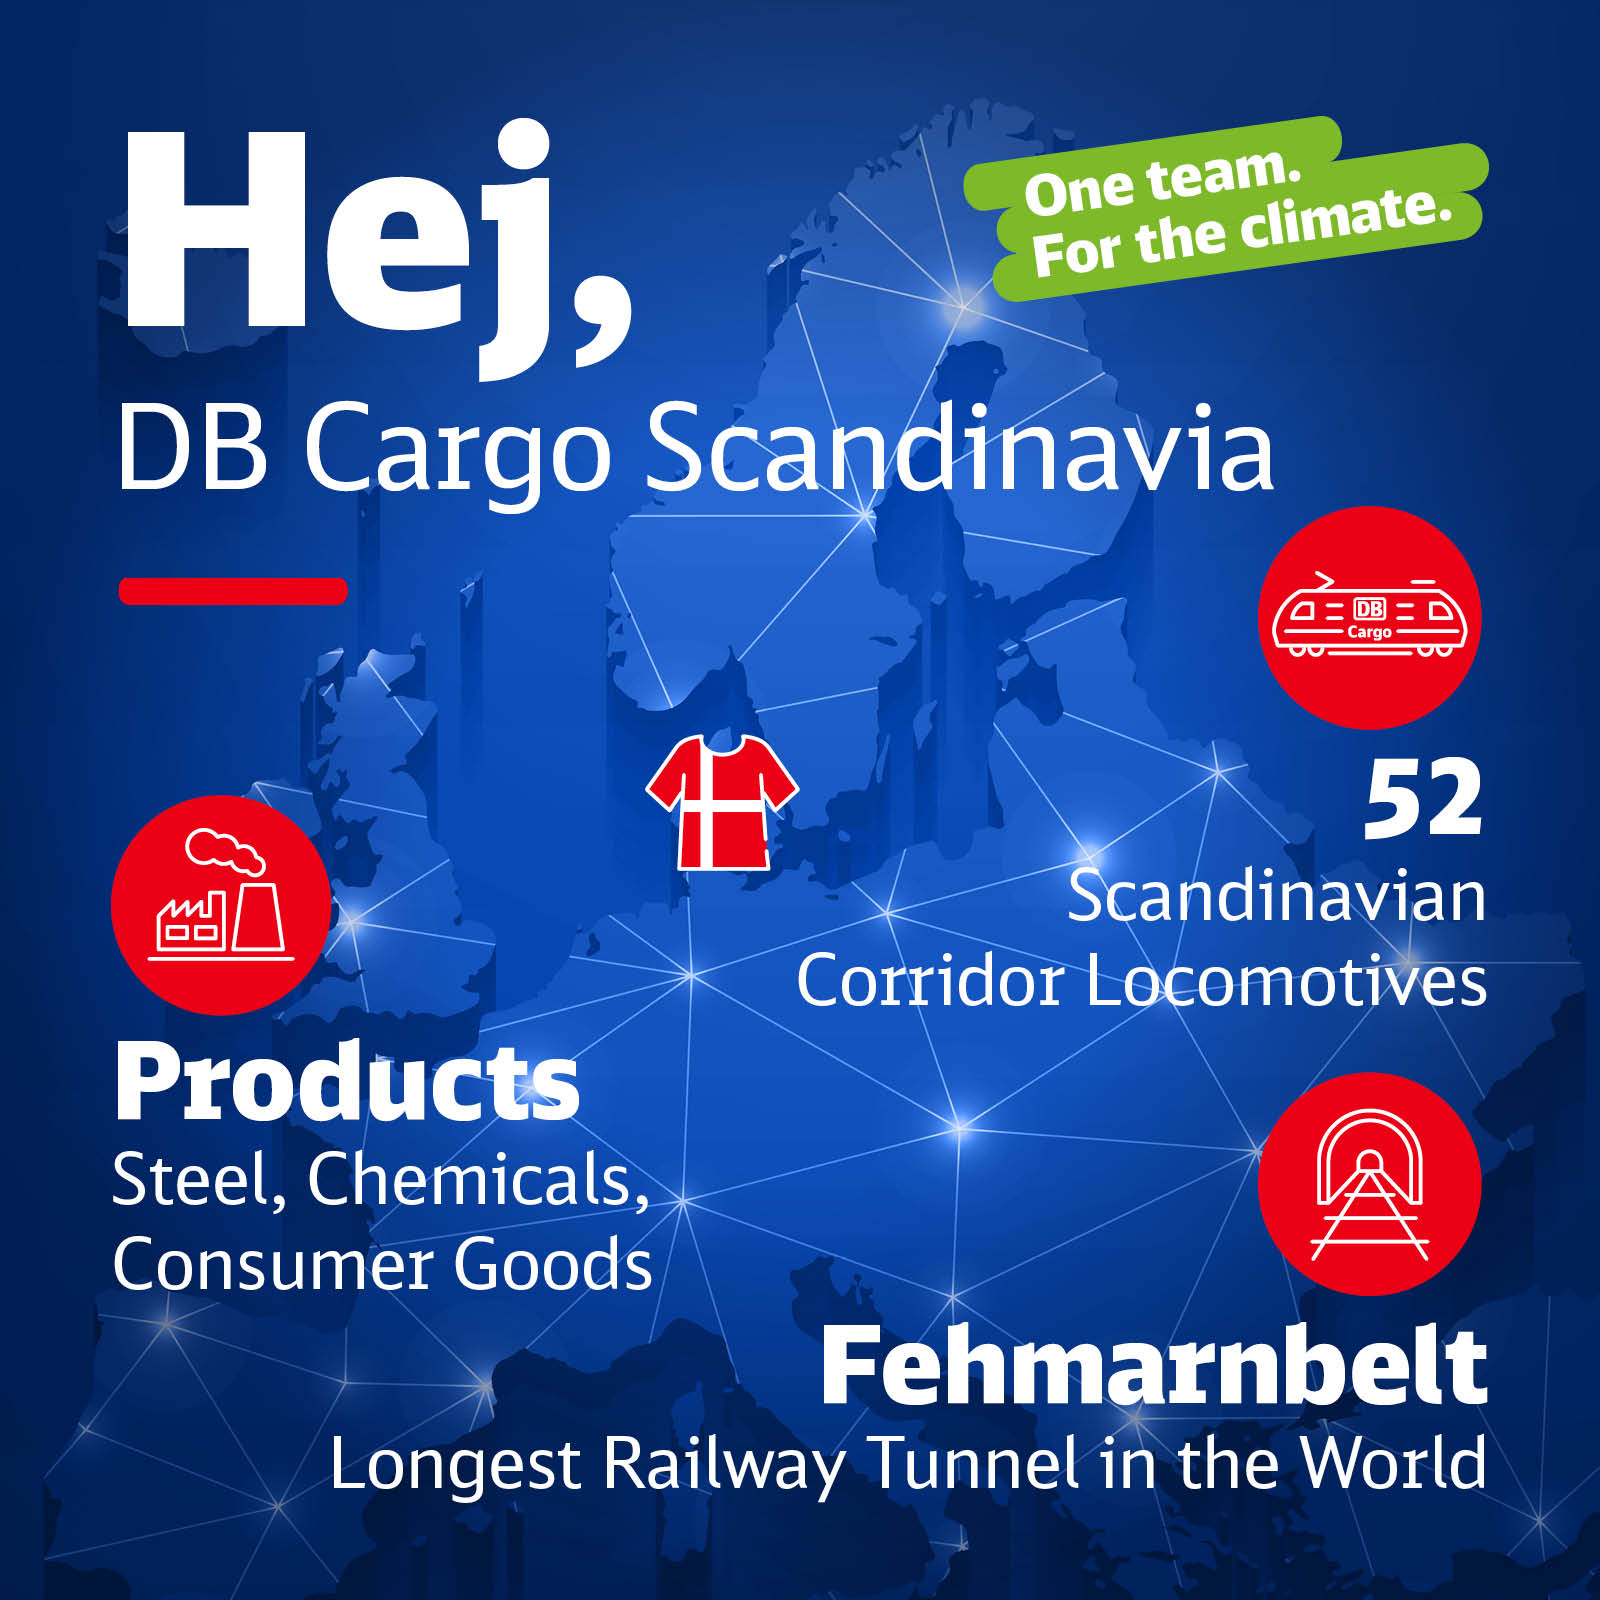  A map of Europe with information about DB Cargo Scandinavia.